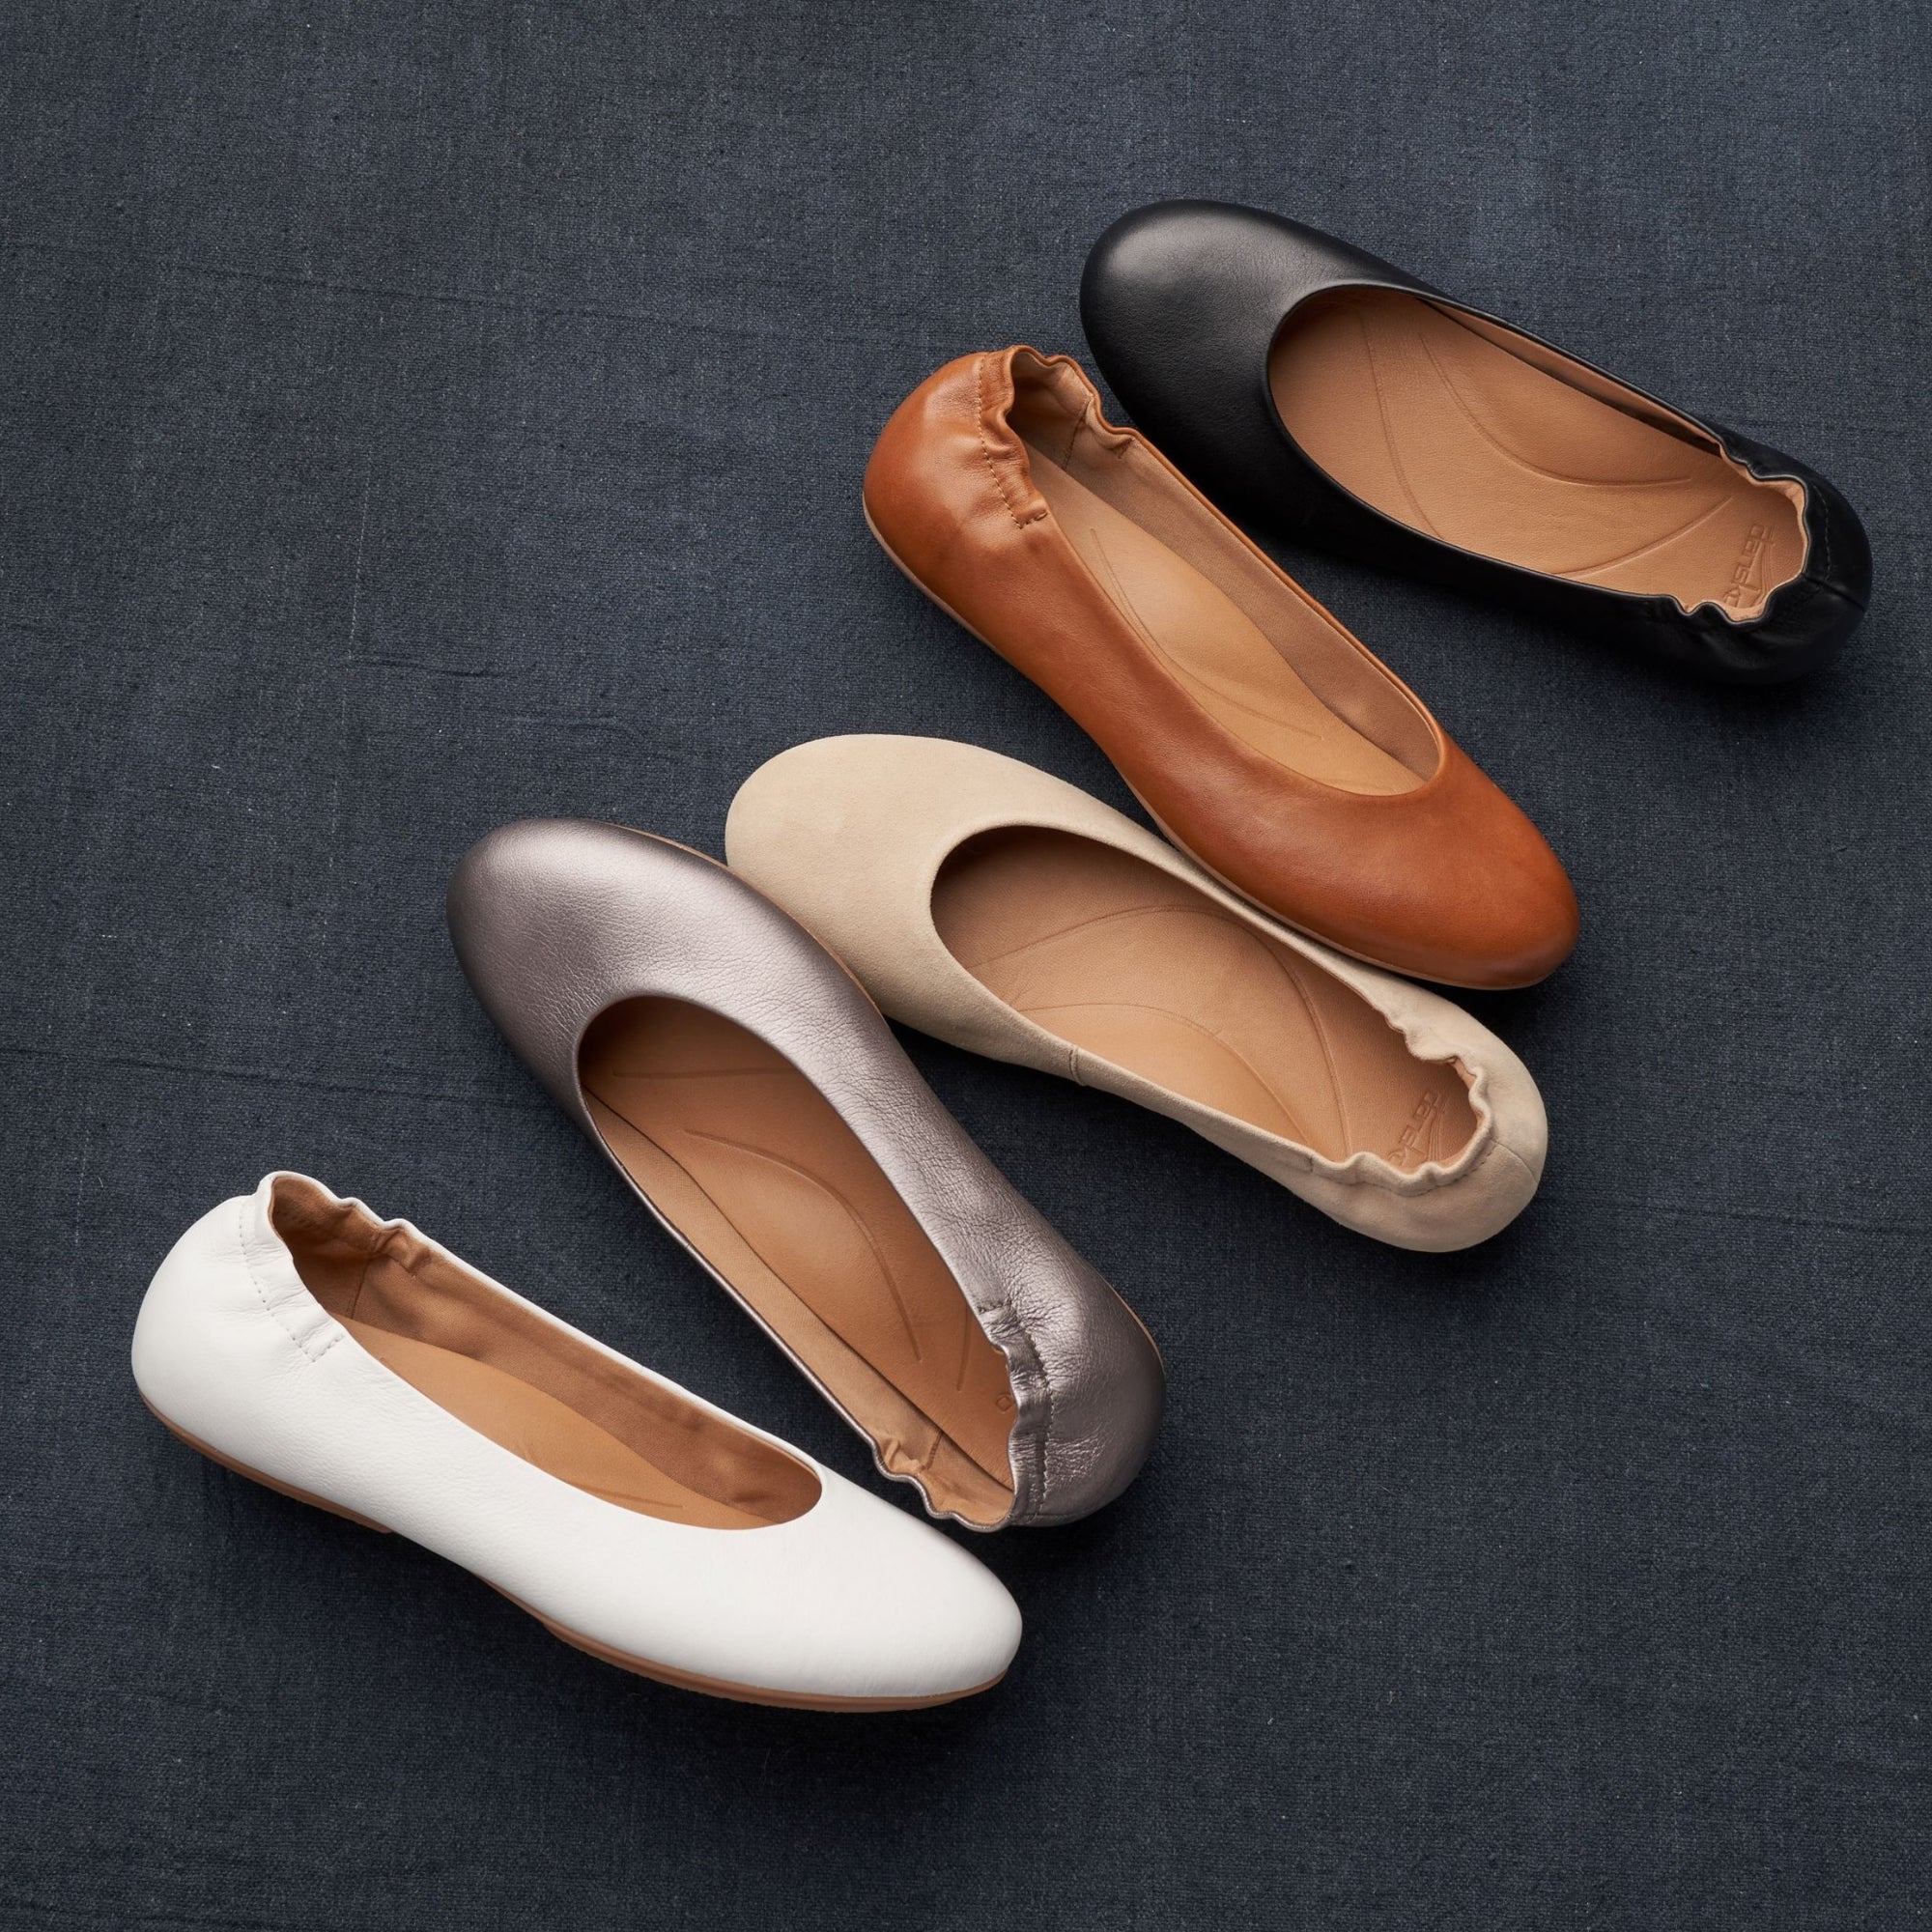 Five different leather colors of a flat made with arch support.